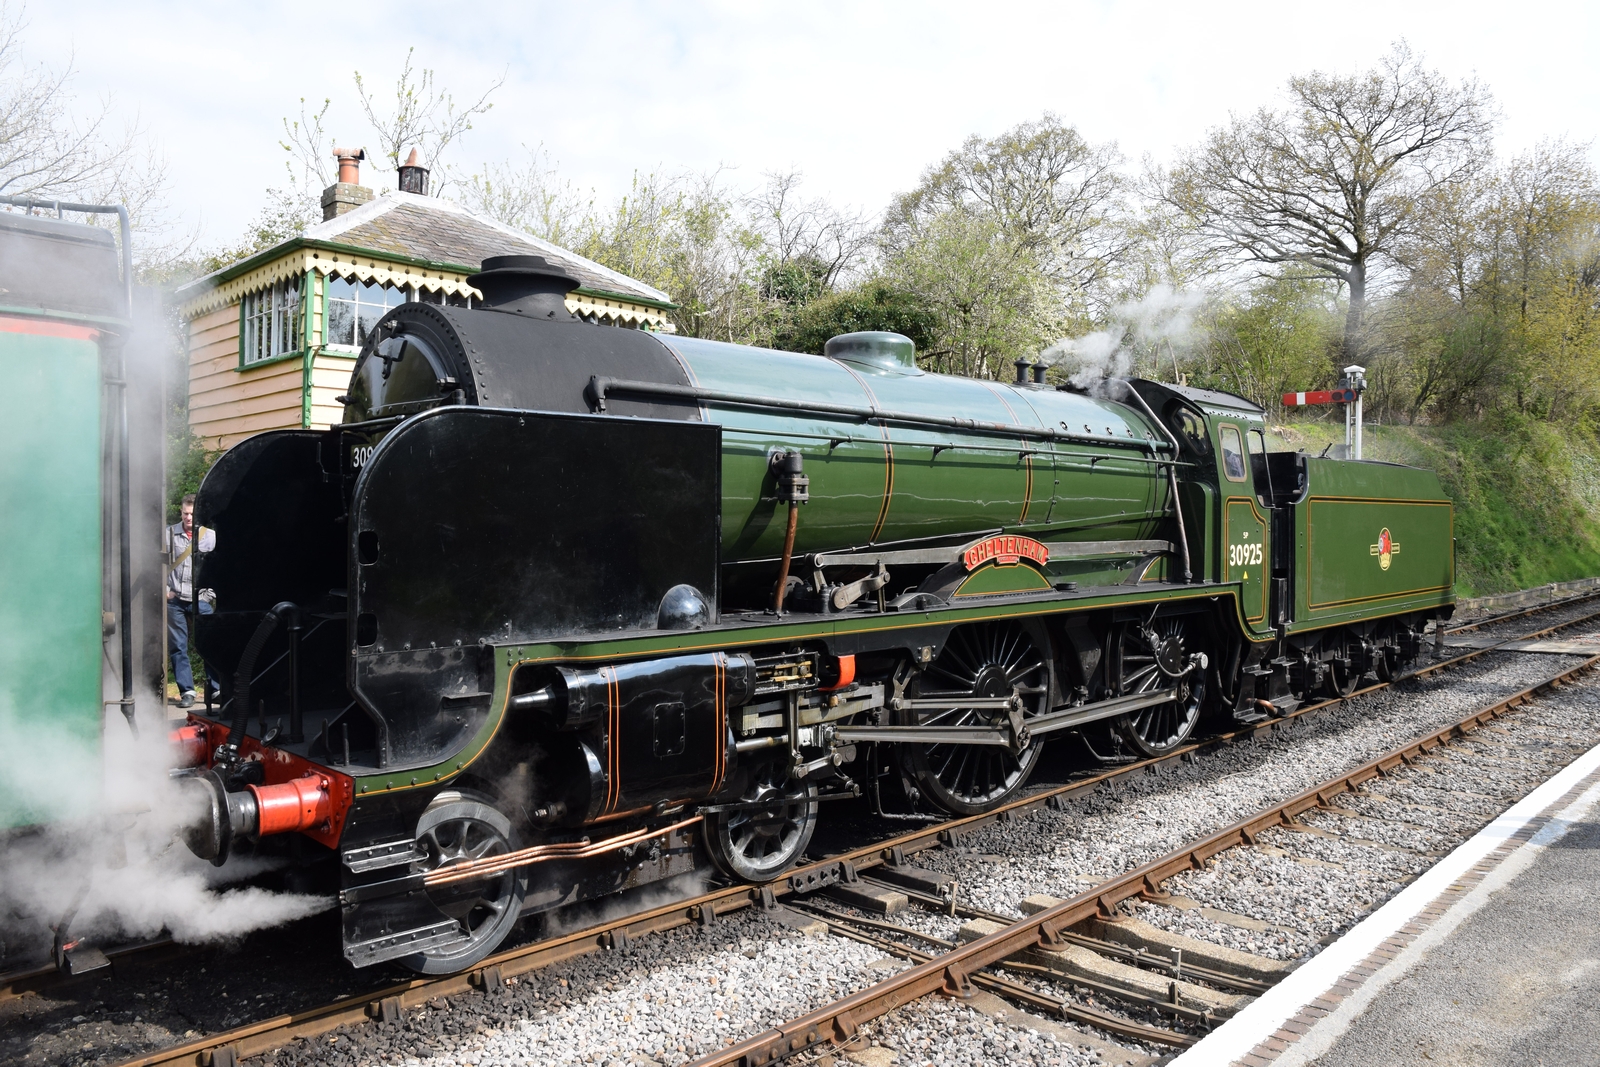 The “Schools class” of the British Southern Railway was only built from 1930 and was the most powerful 4-4-0 in Europe